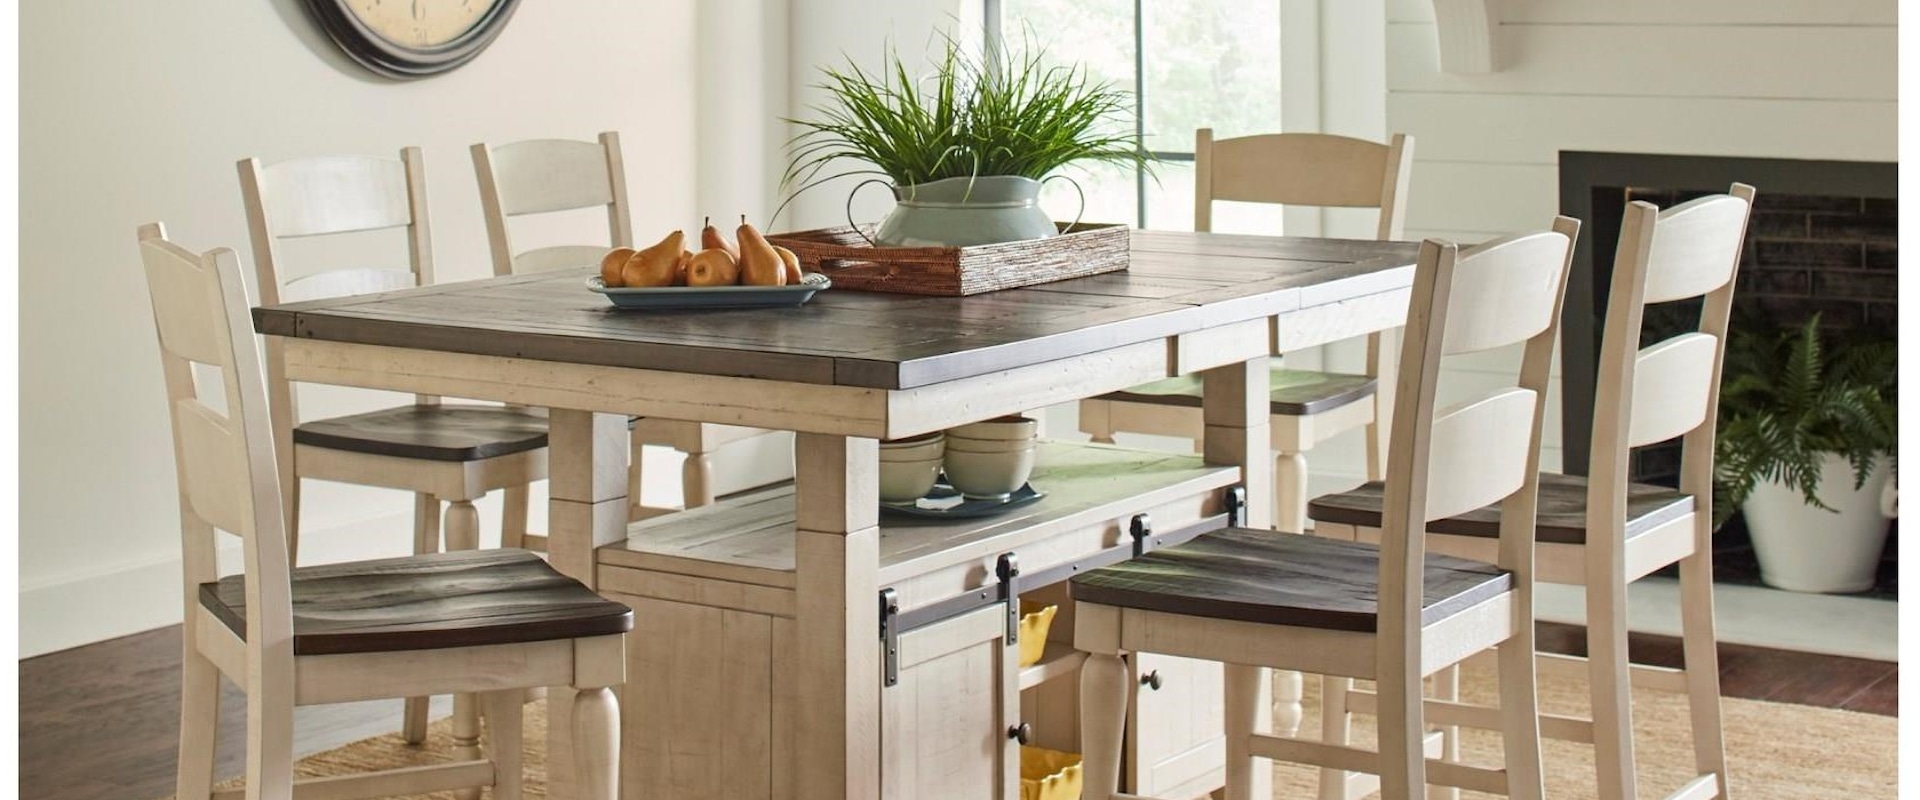 Farmhouse Counter height table and 4 stools